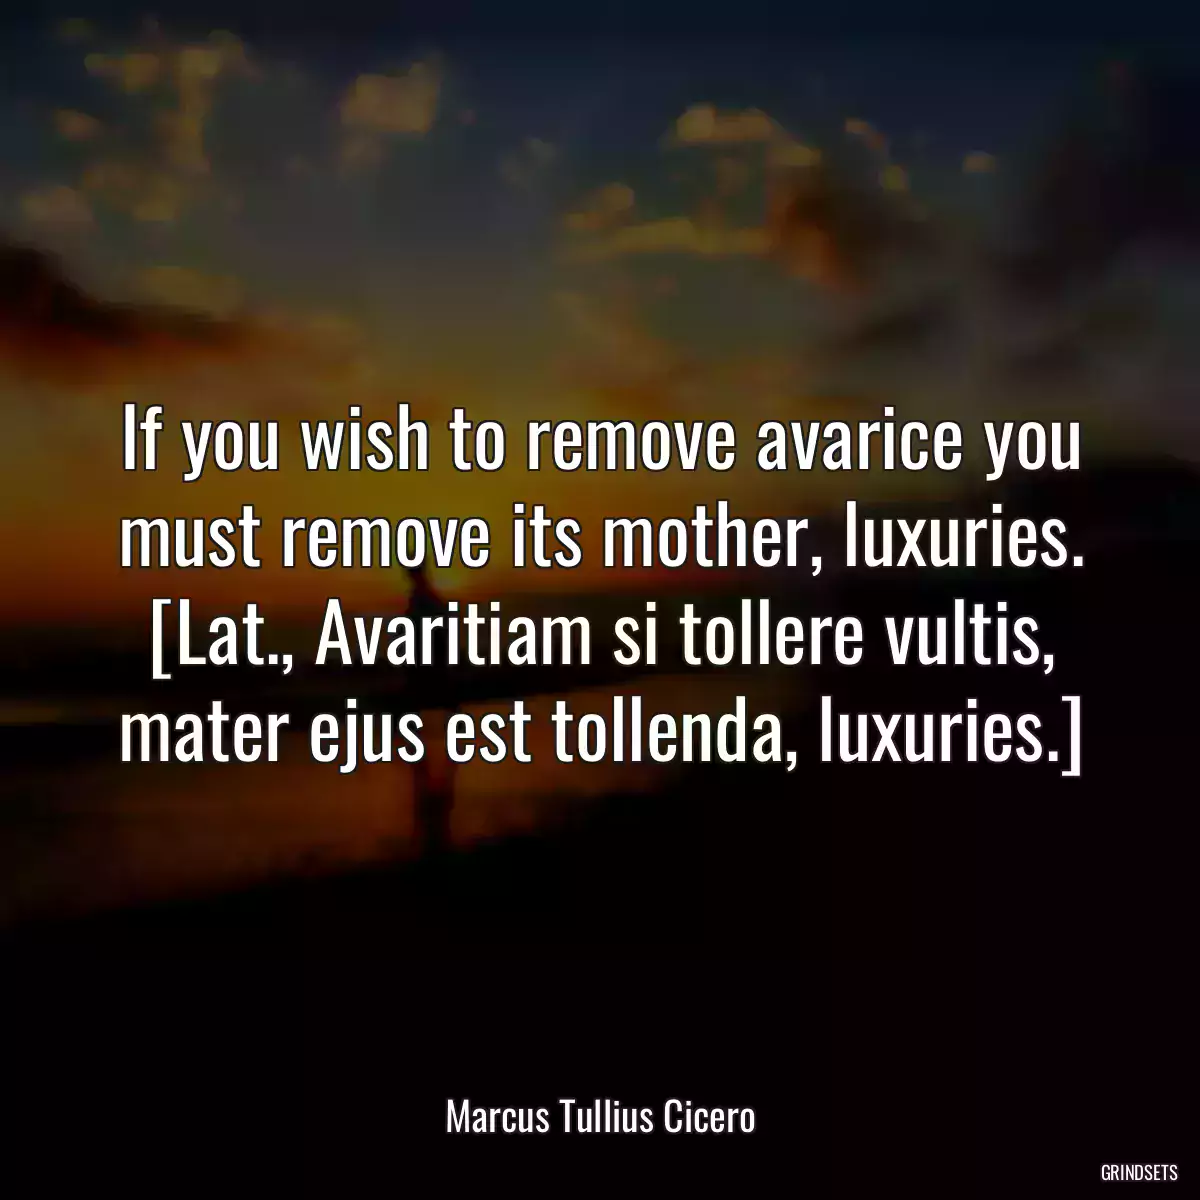 If you wish to remove avarice you must remove its mother, luxuries.
[Lat., Avaritiam si tollere vultis, mater ejus est tollenda, luxuries.]